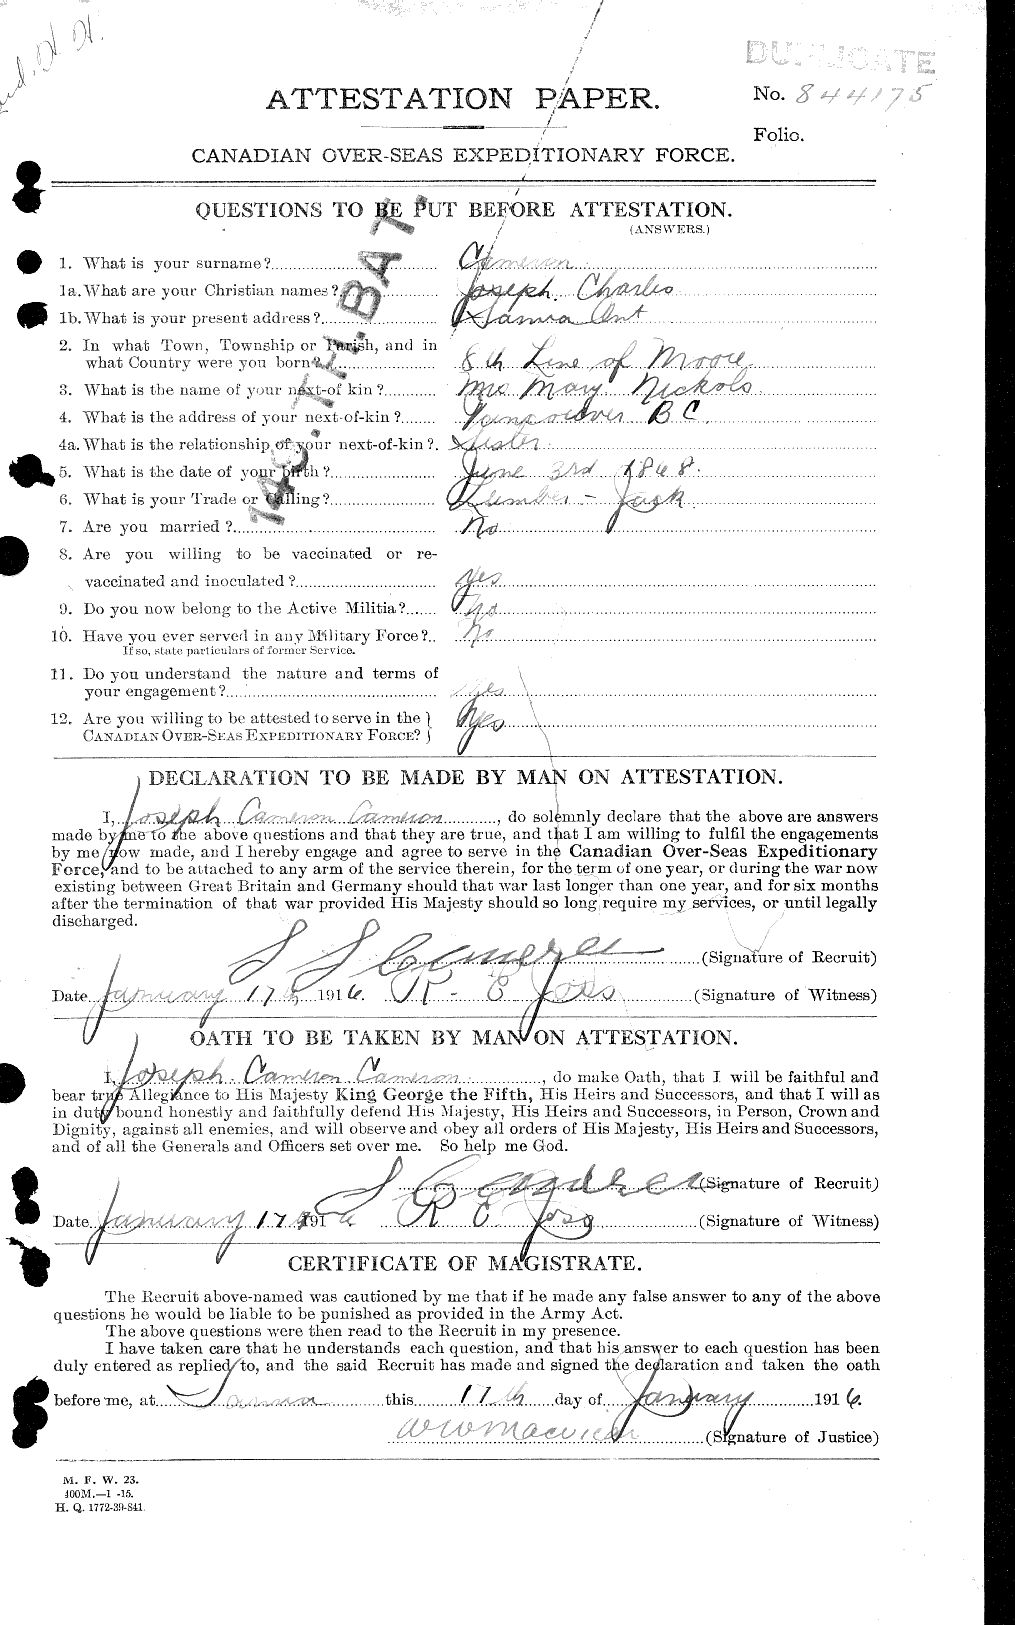 Personnel Records of the First World War - CEF 002365a